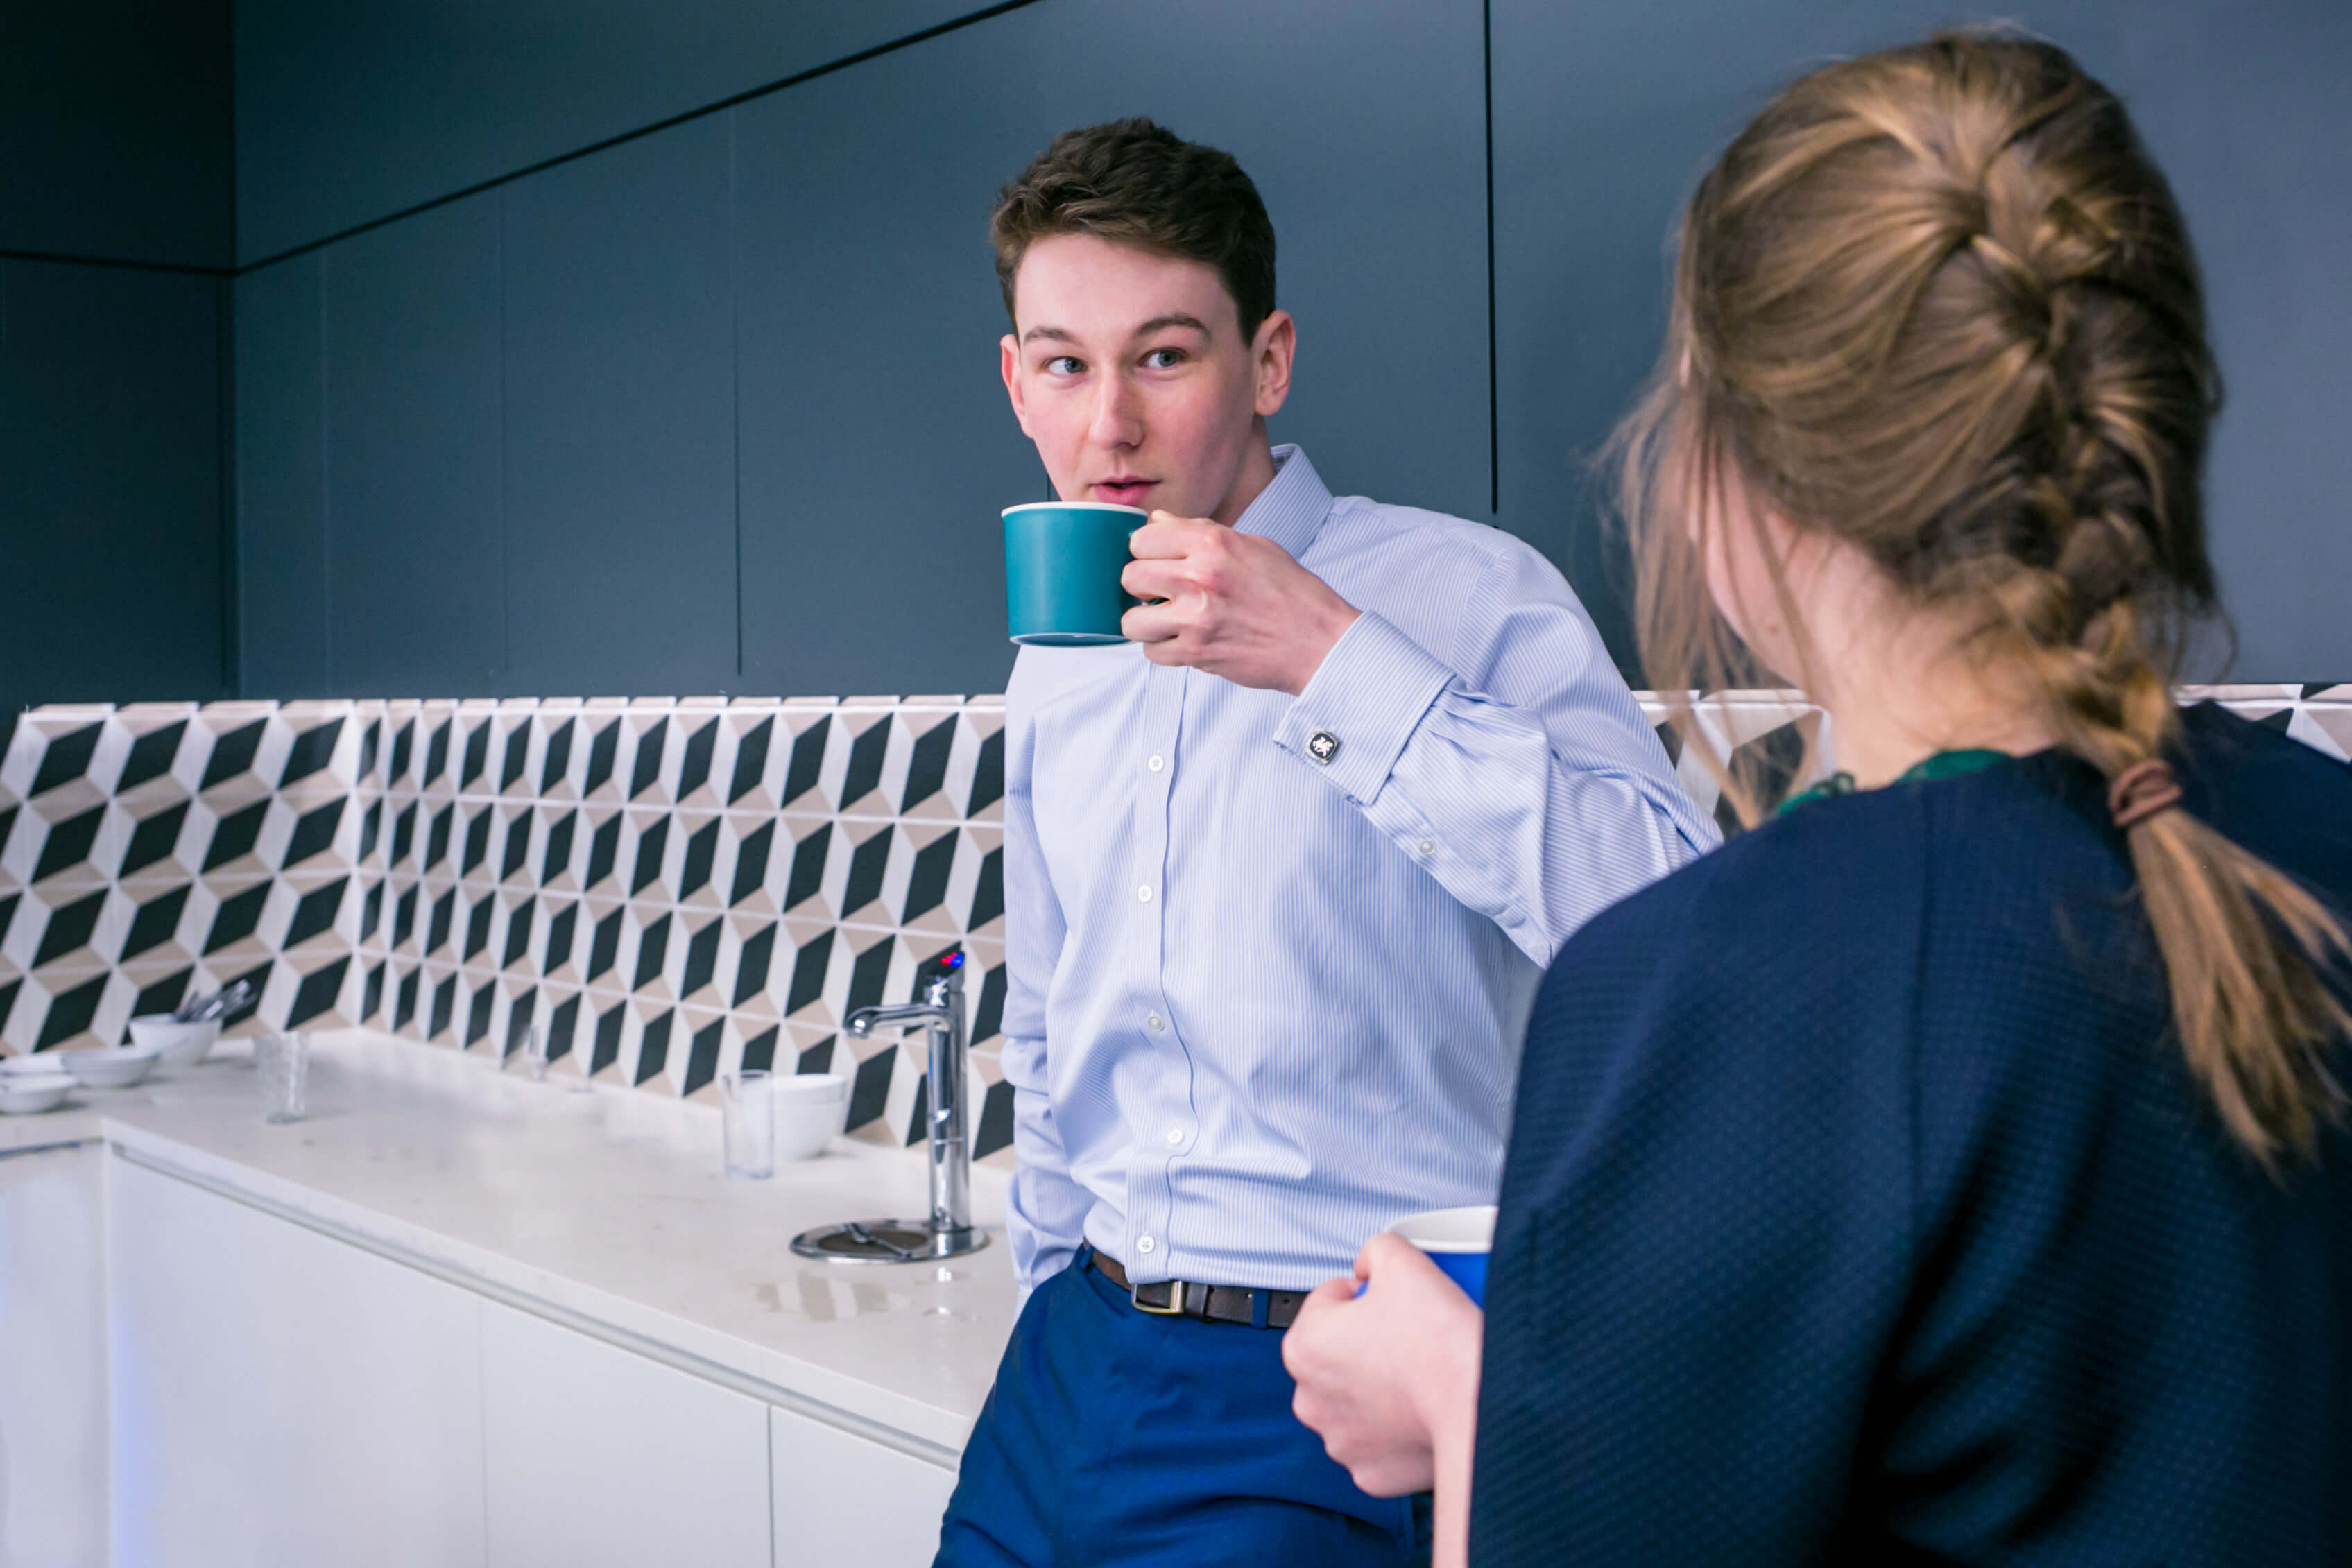 Two colleagues chatting and drinking a beverage in an office kitchen. The male colleague is in focus but you can only see the female colleague's back